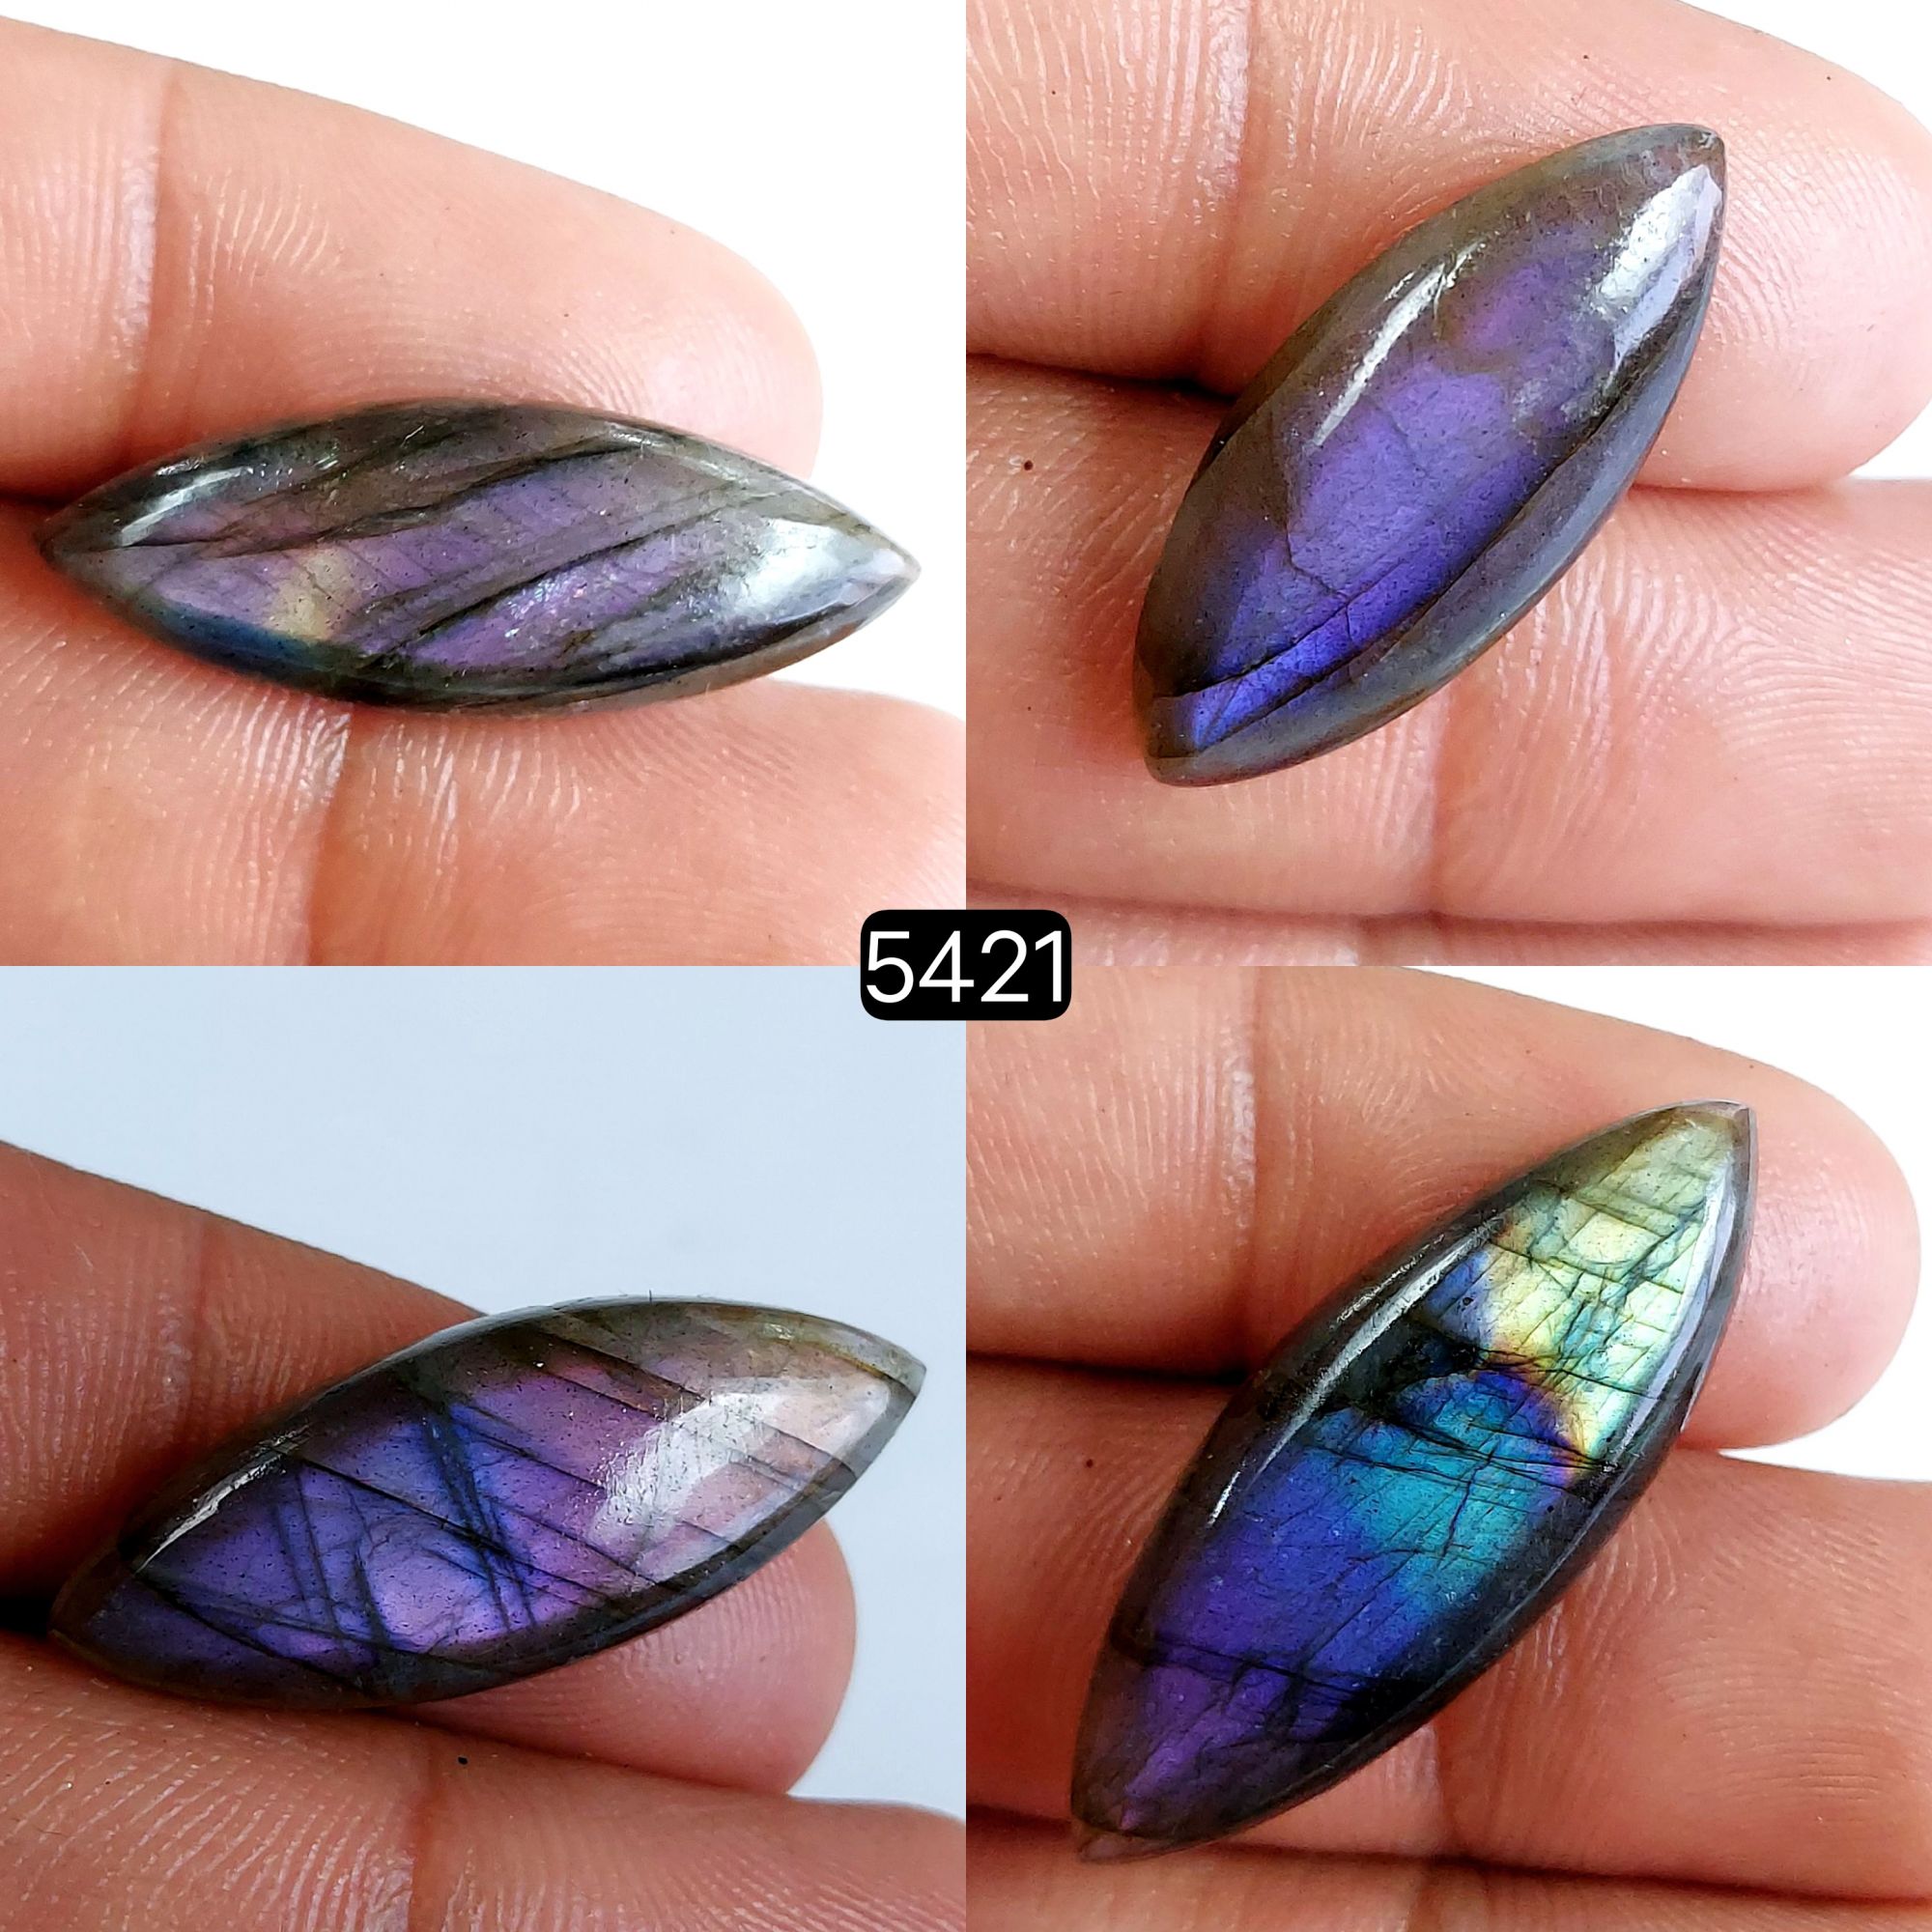 4 Pcs Lot 67Cts Natural Labradorite Marquise Shape Cabochon Loose Gemstone For Jewelry Making Crystal Cabochon Semi-Precious Labradorite Gemstone 35x13-29x10mm